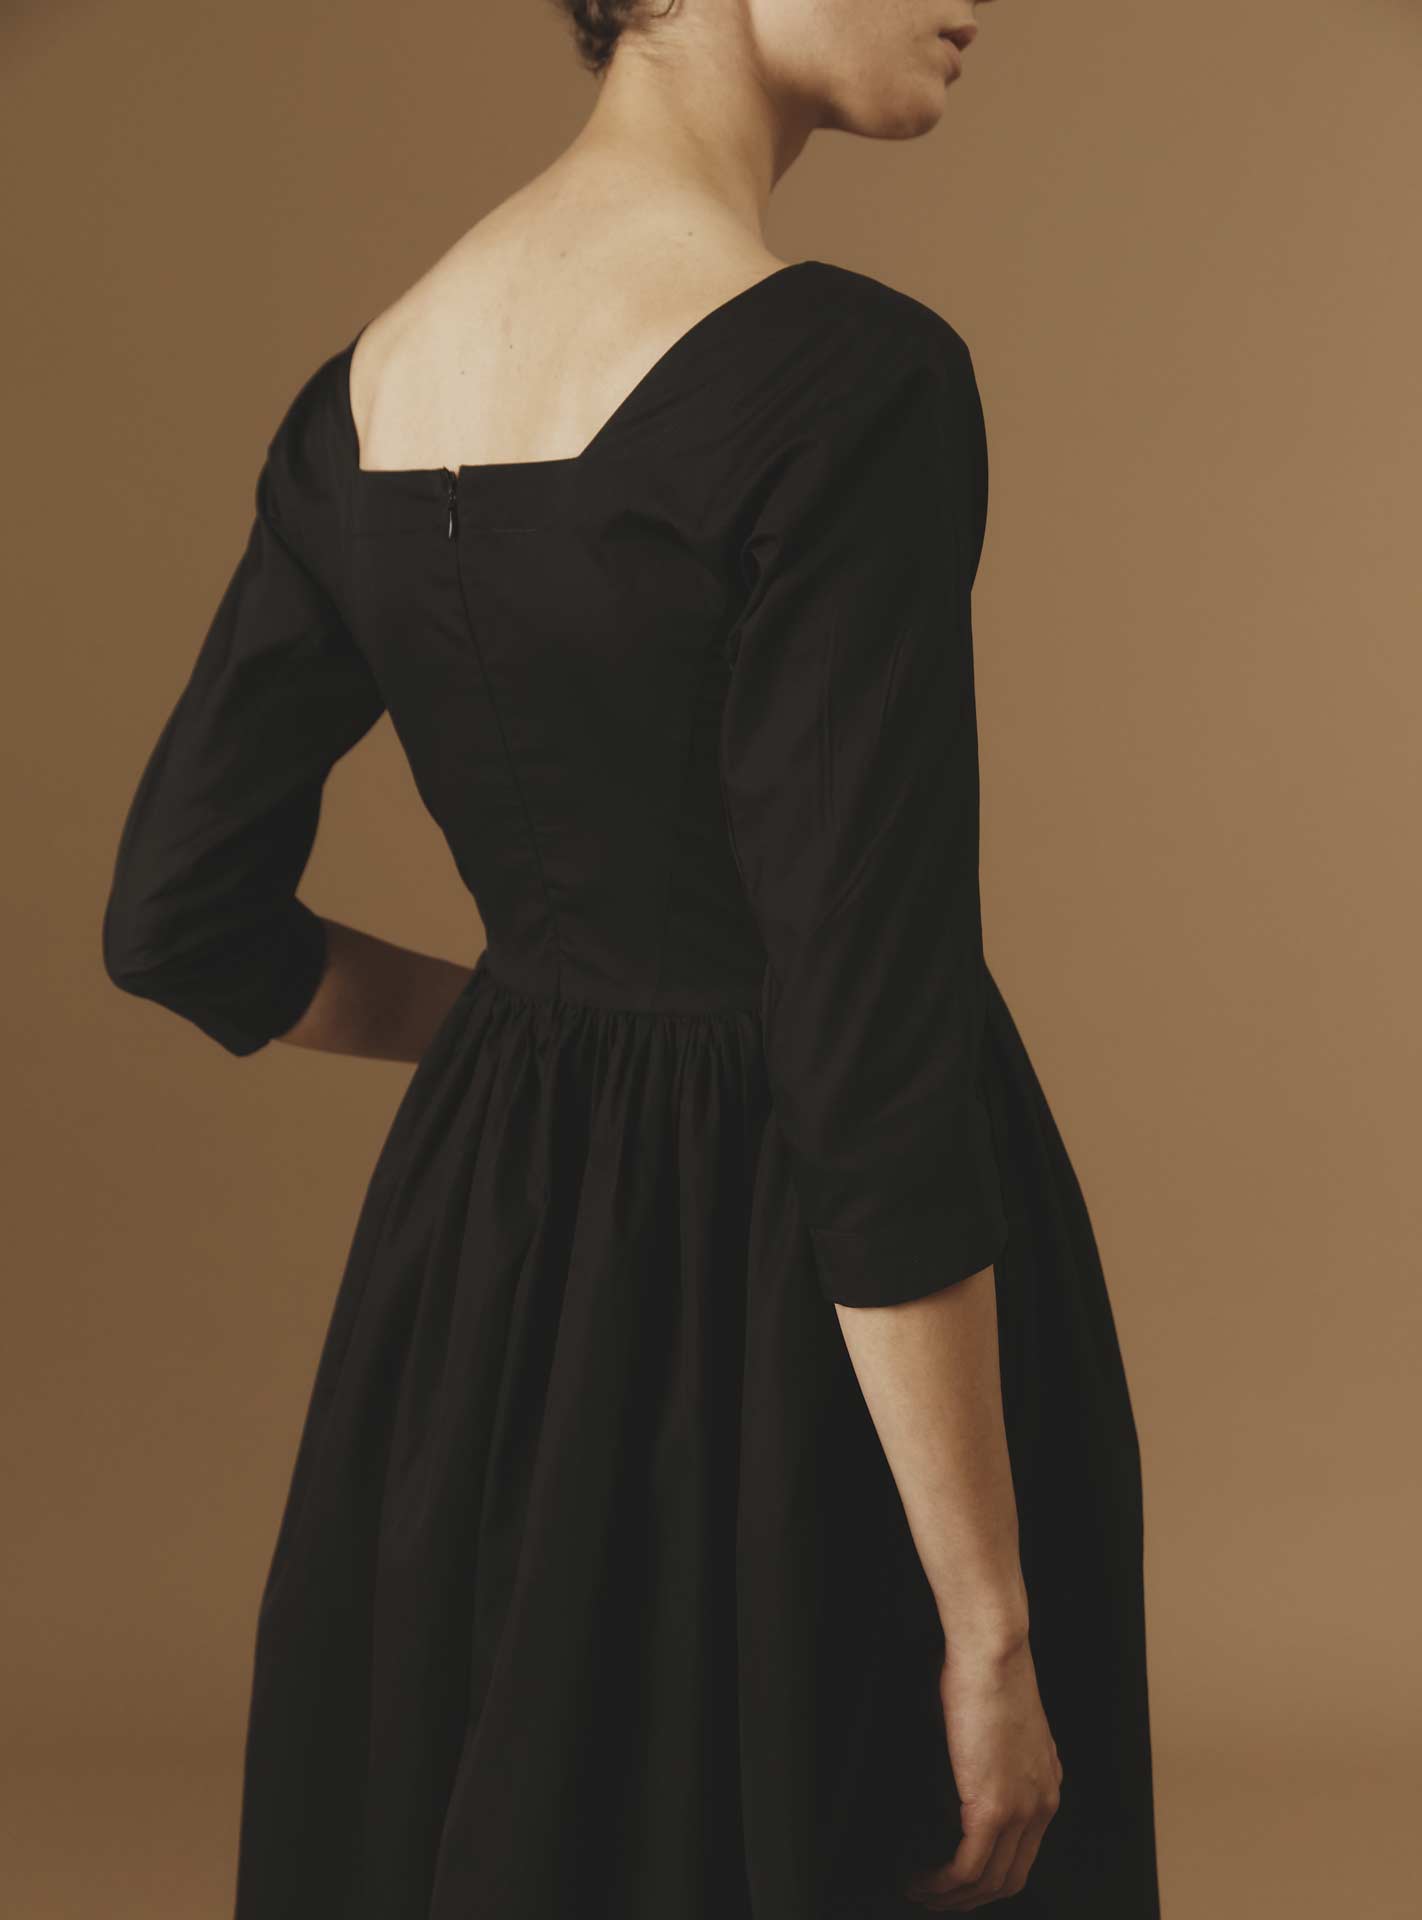 Close-up back view - Amalia Black luxury cotton Dress by Thierry Colson